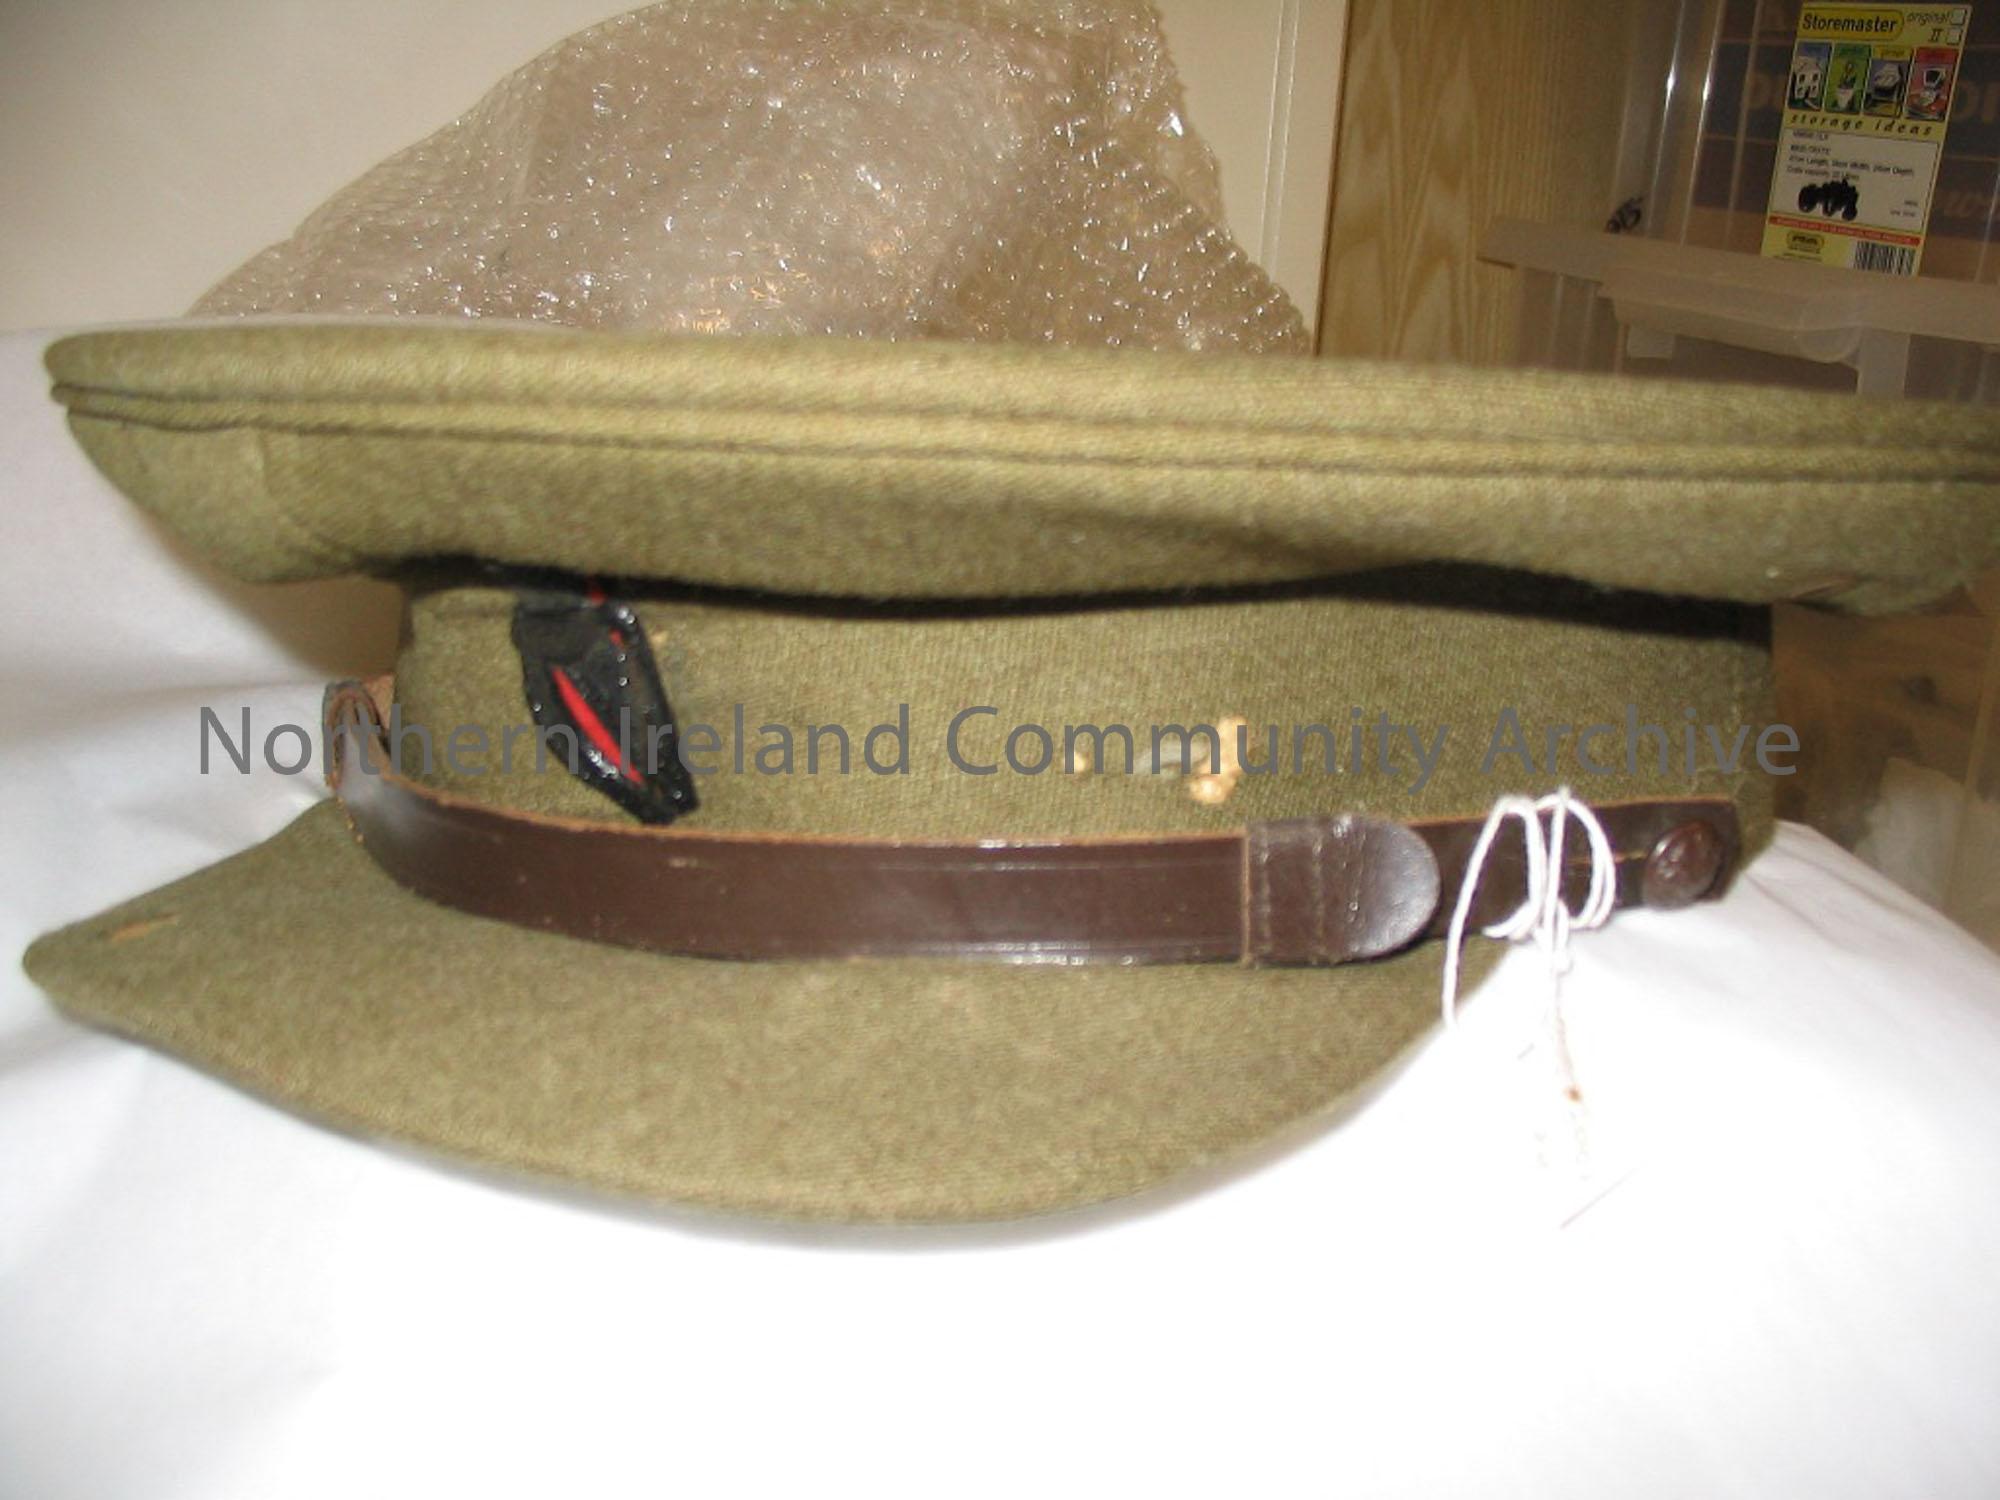 Officer’s cap, possibly RUC. Green, size 6 7/8.